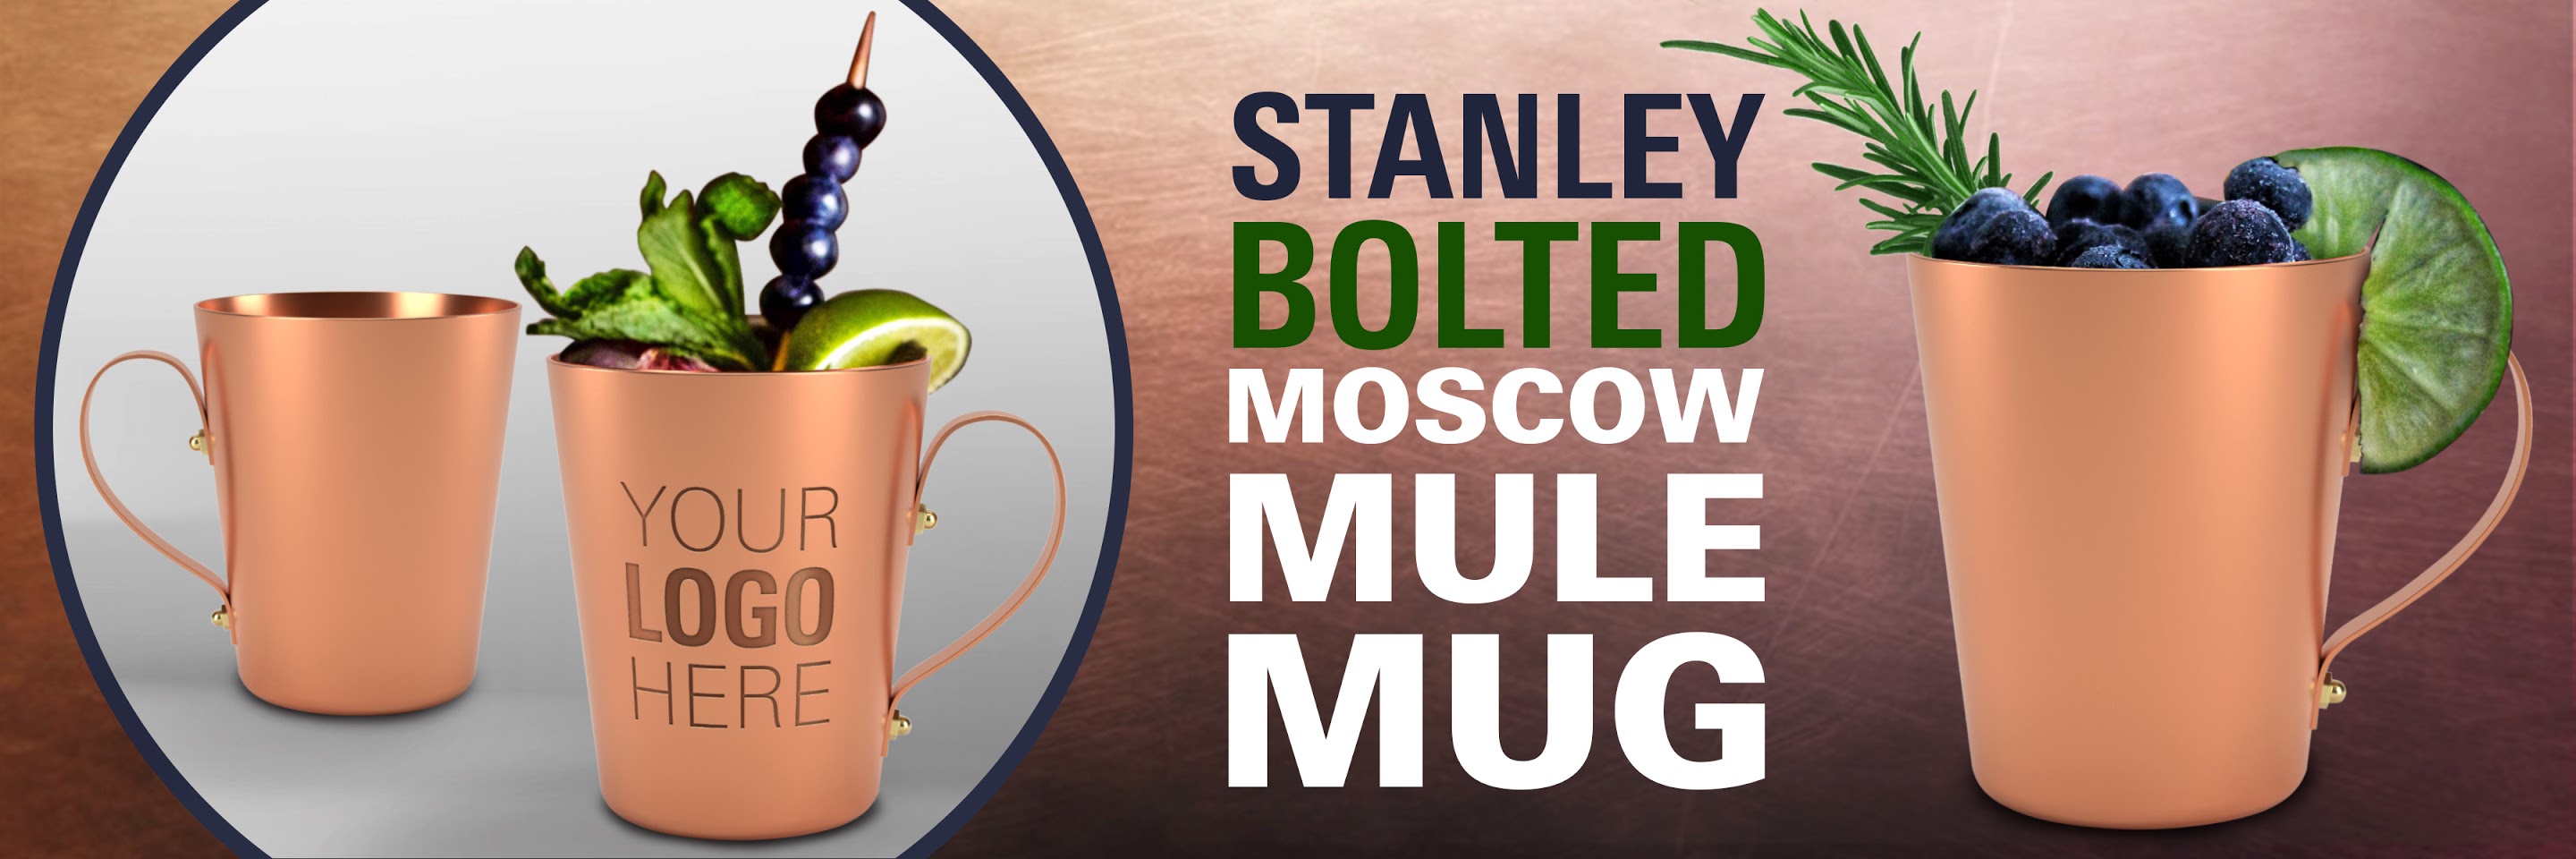 Stanley Bolted Moscow Mule